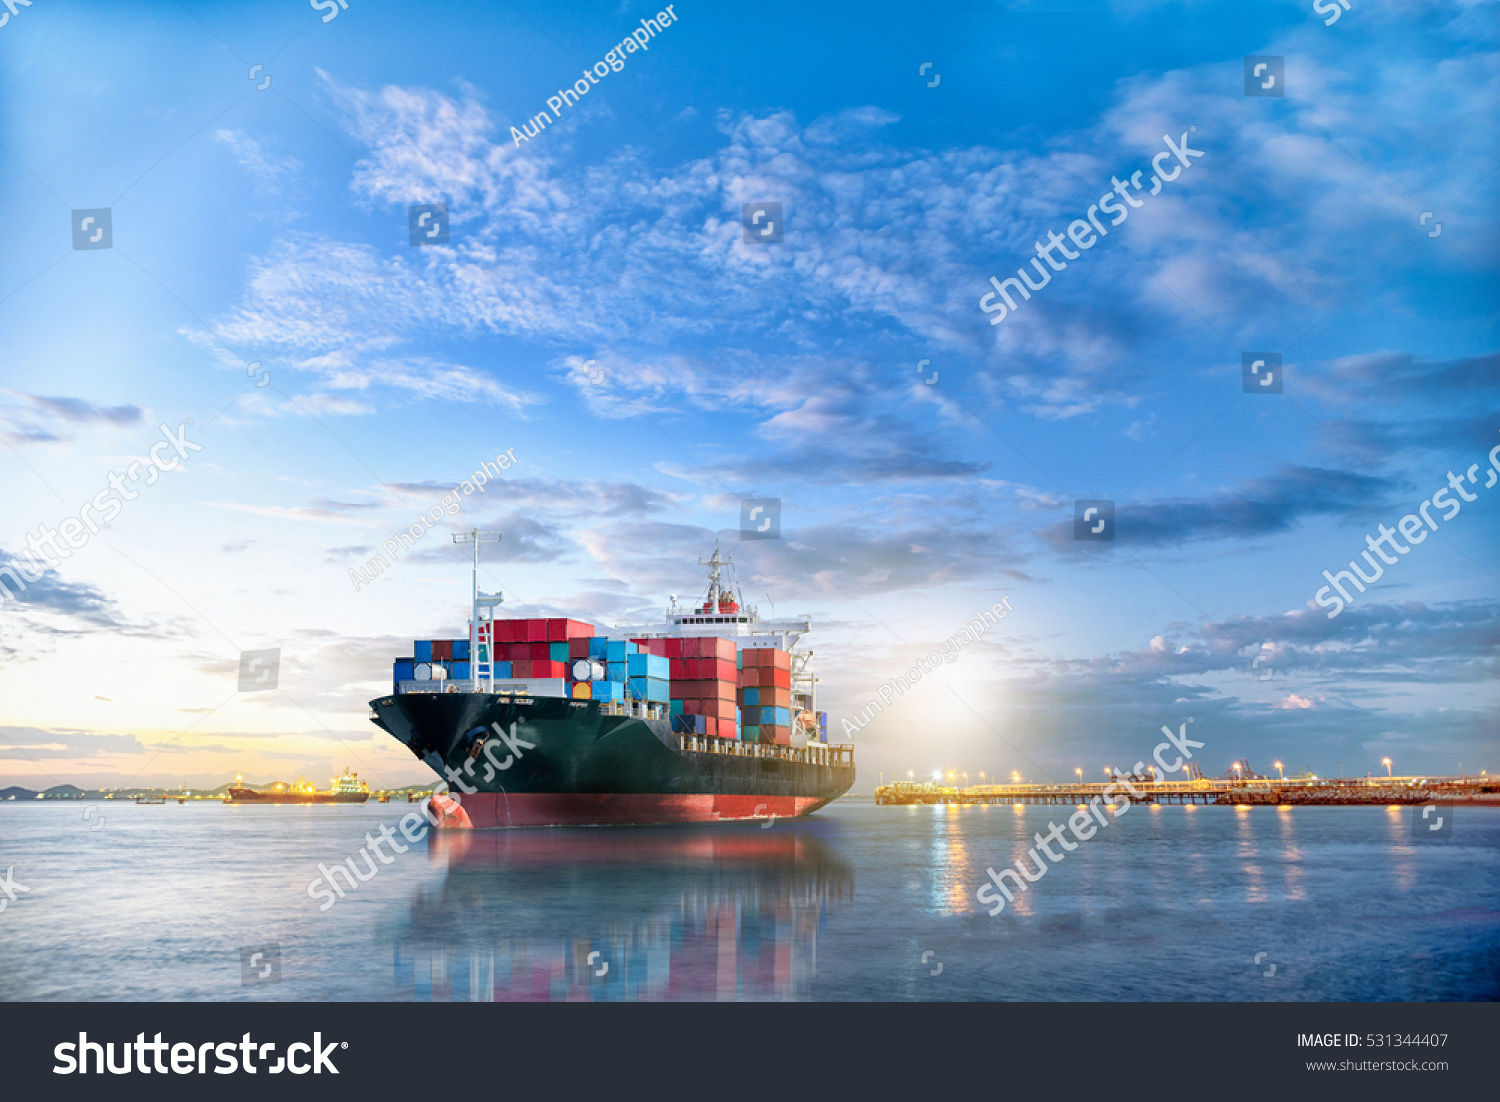 Logistics and transportation of International Container Cargo ship in the ocean at twilight sky, Freight Transportation, Shipping #531344407